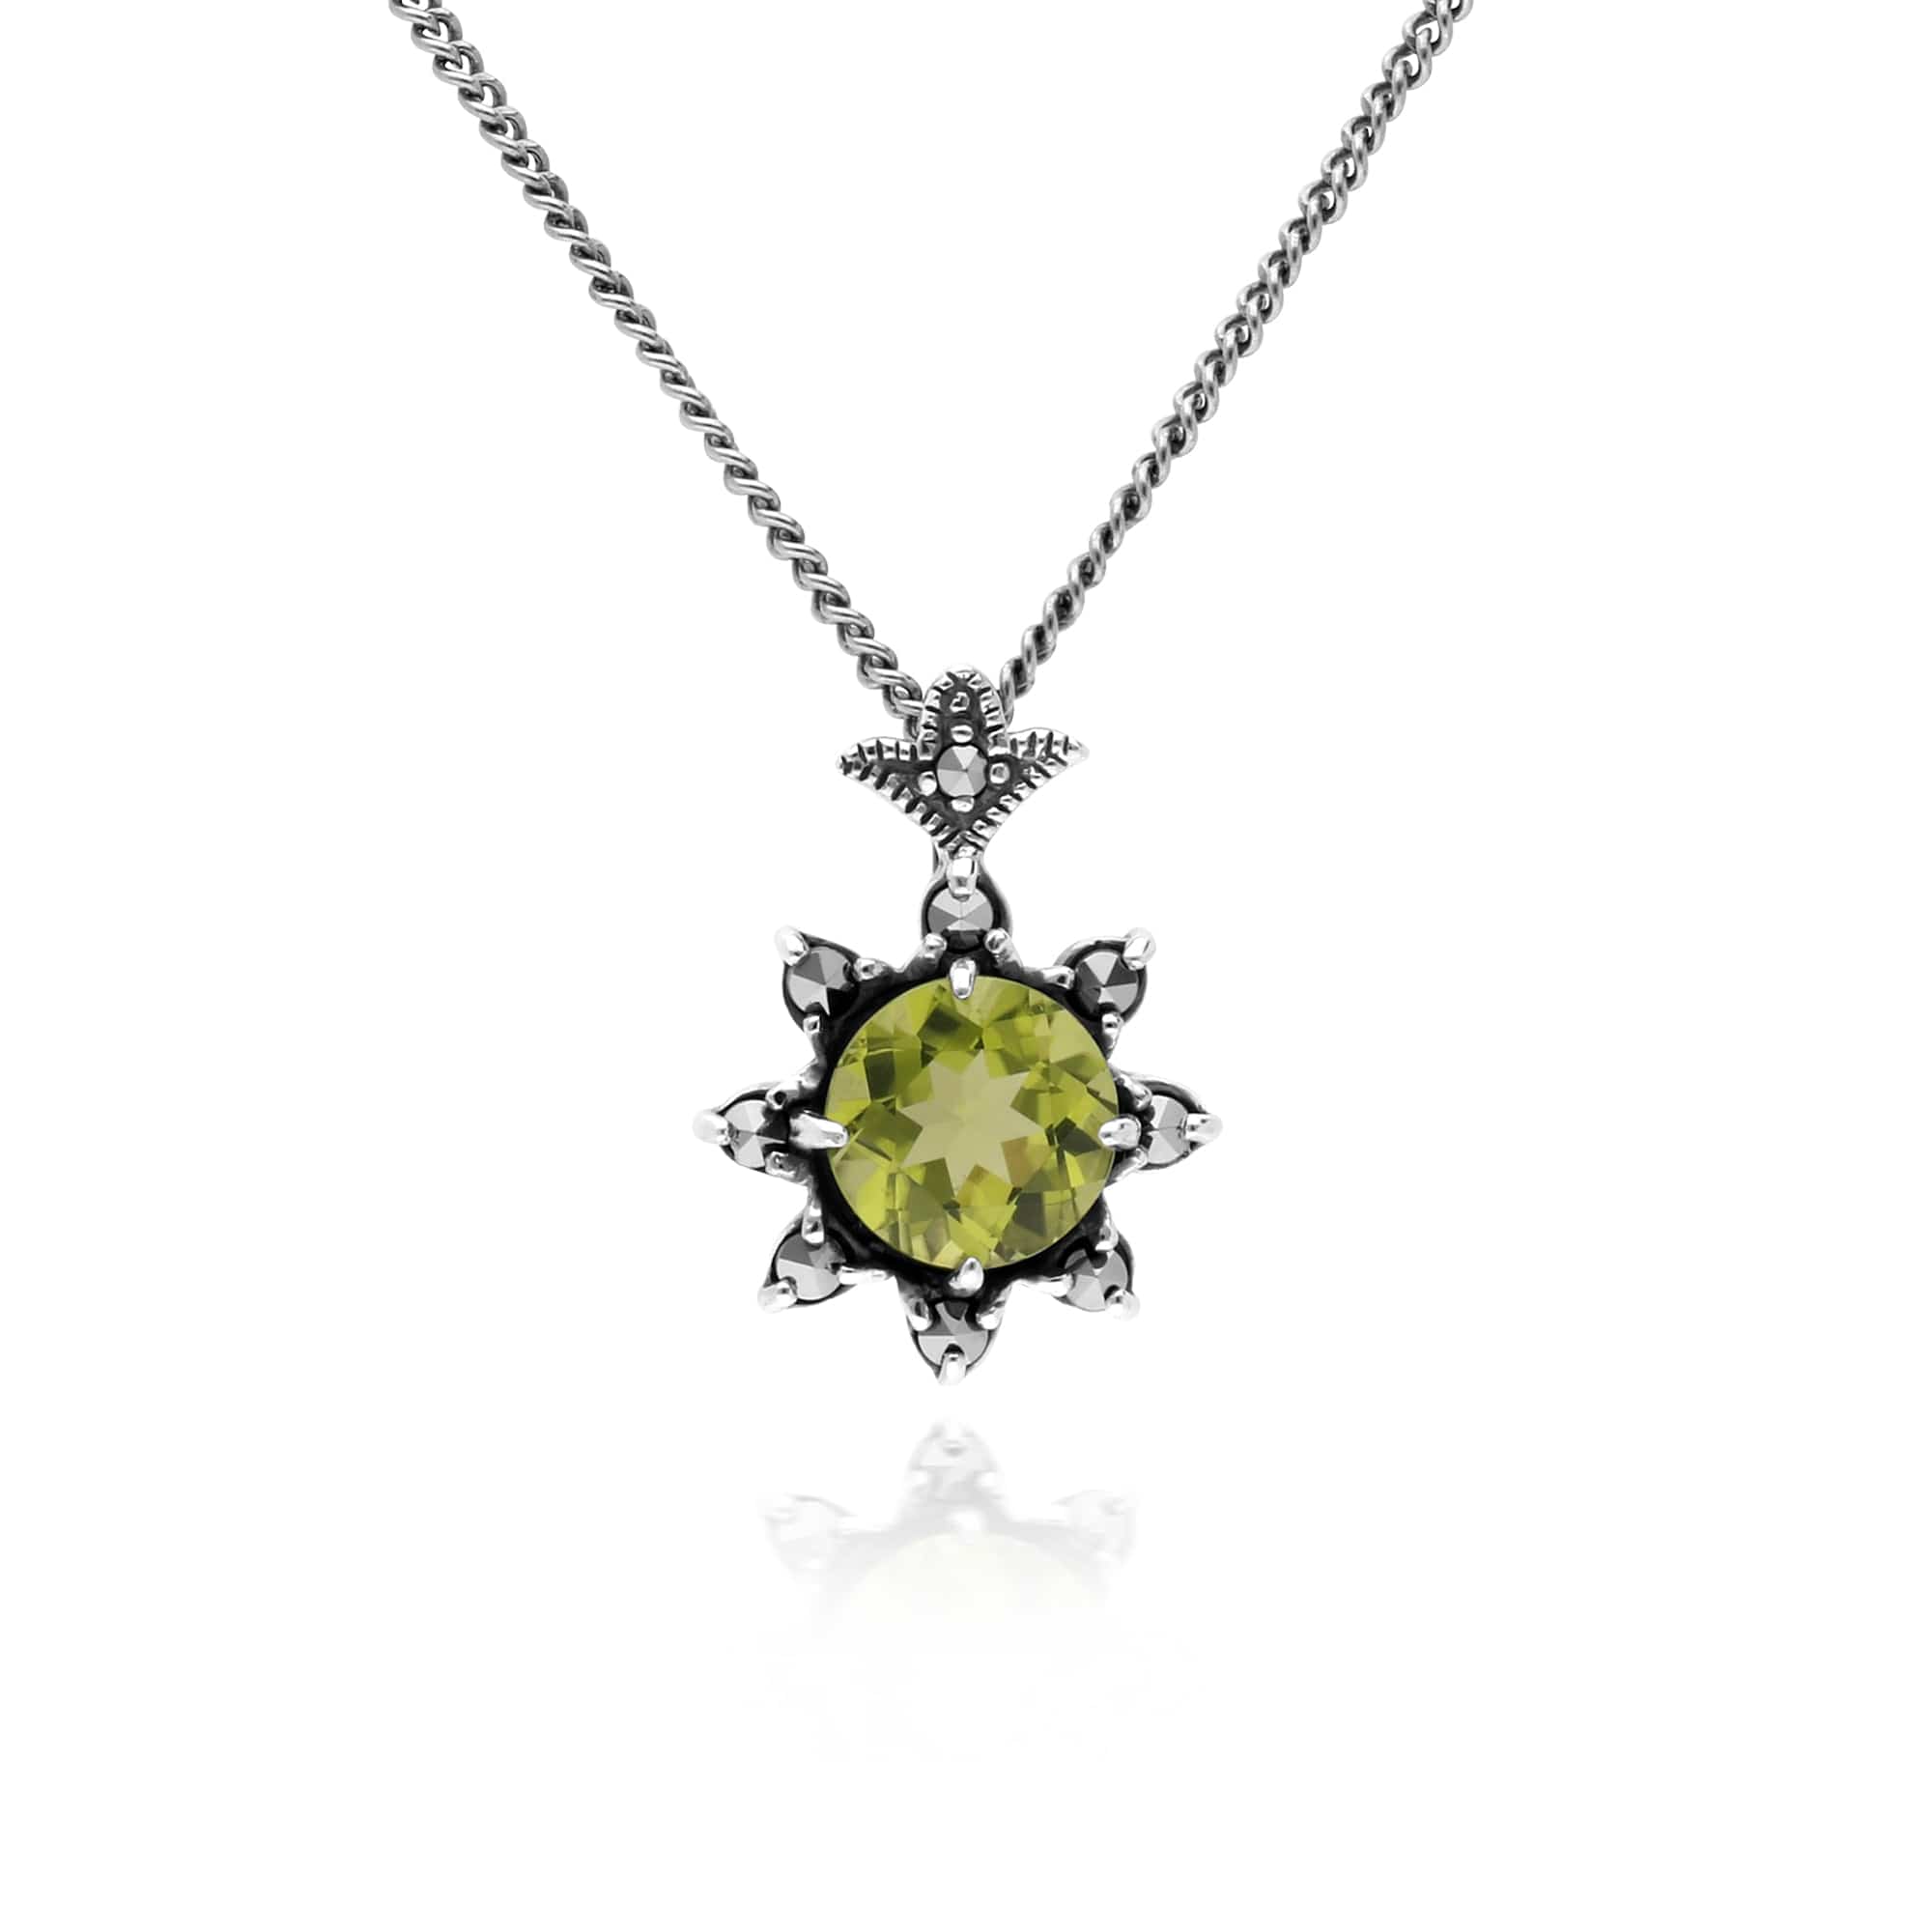 214N696004925-214R599504925 Art Nouveau Style Style Round Peridot & Marcasite Starburst Pendant & Ring Set in 925 Sterling Silver 2